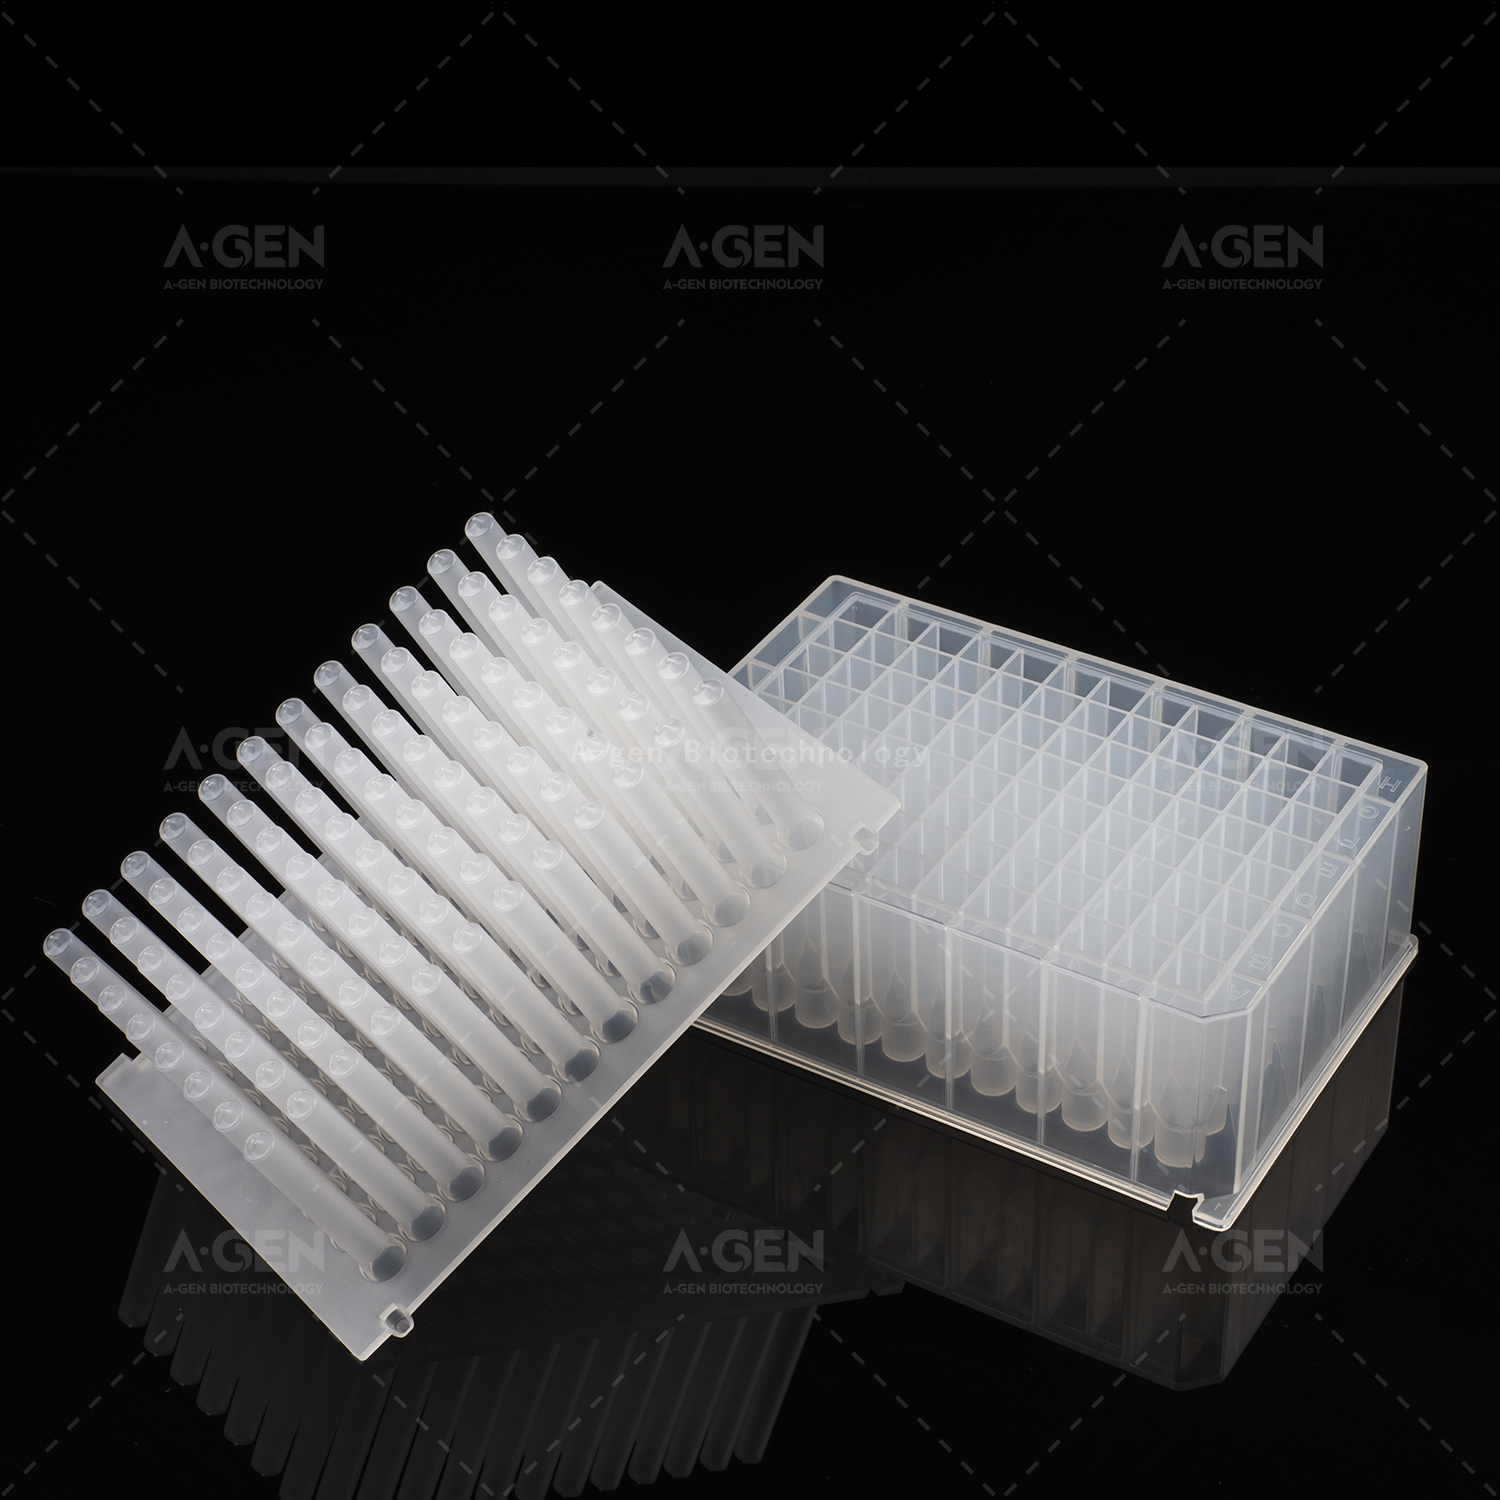 Laboratory Magnetic Bead Tip Comb for 96 Well Extraction Plate KF